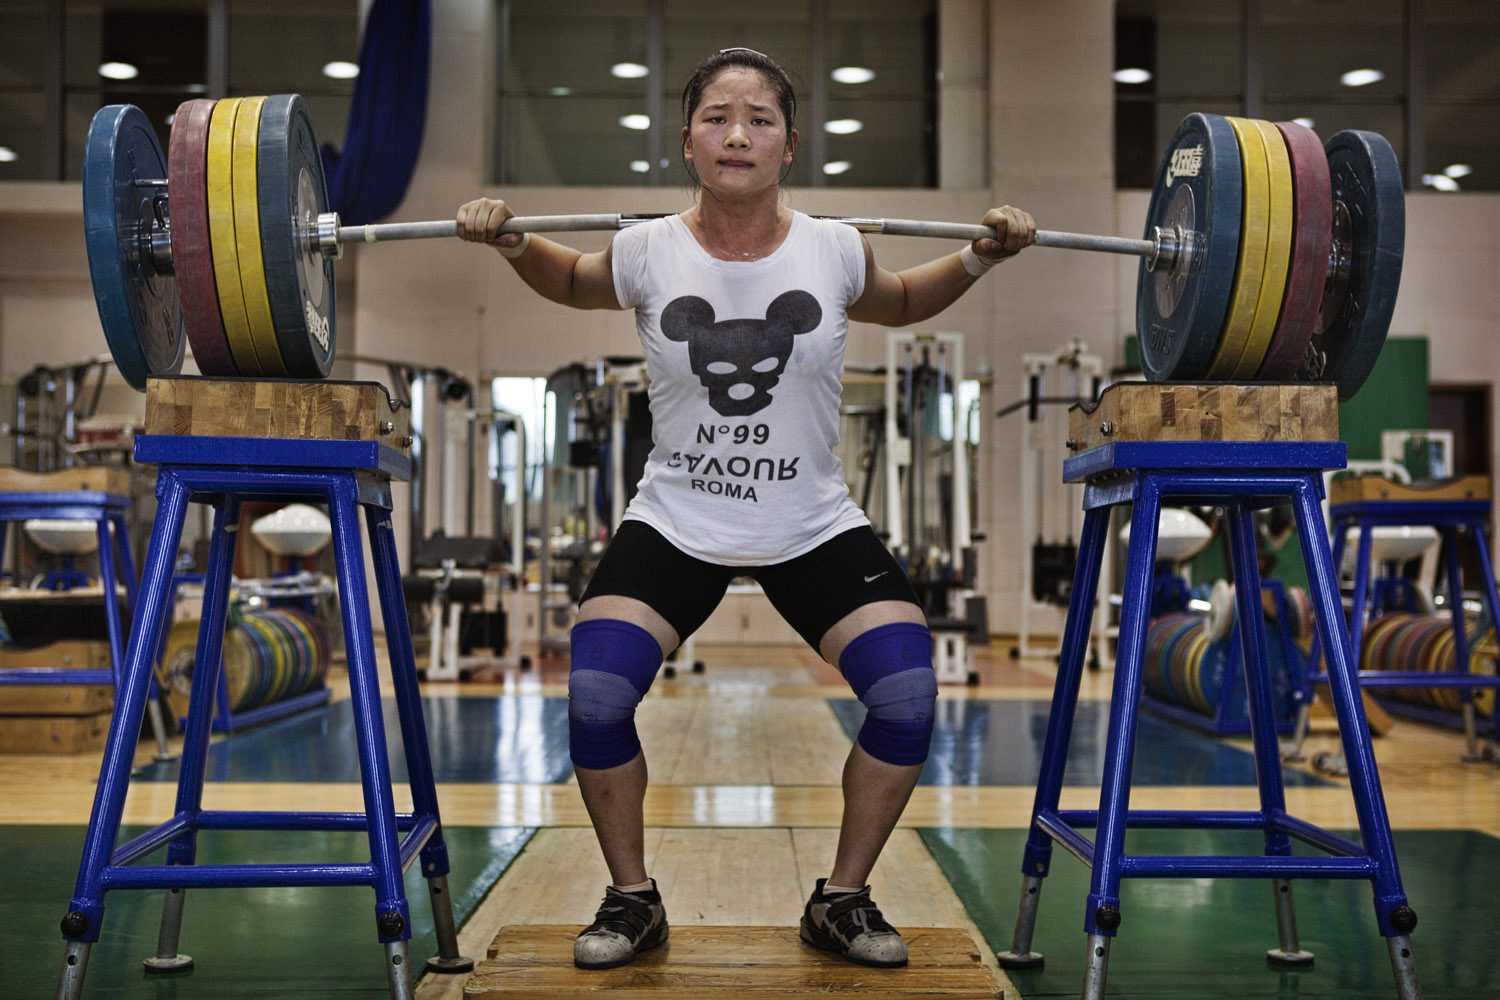 Zhou Wenyu, from Hunan province, trains at the national sports training center in Beijing for a place on the Chinese women's Olympic weight-lifting team.